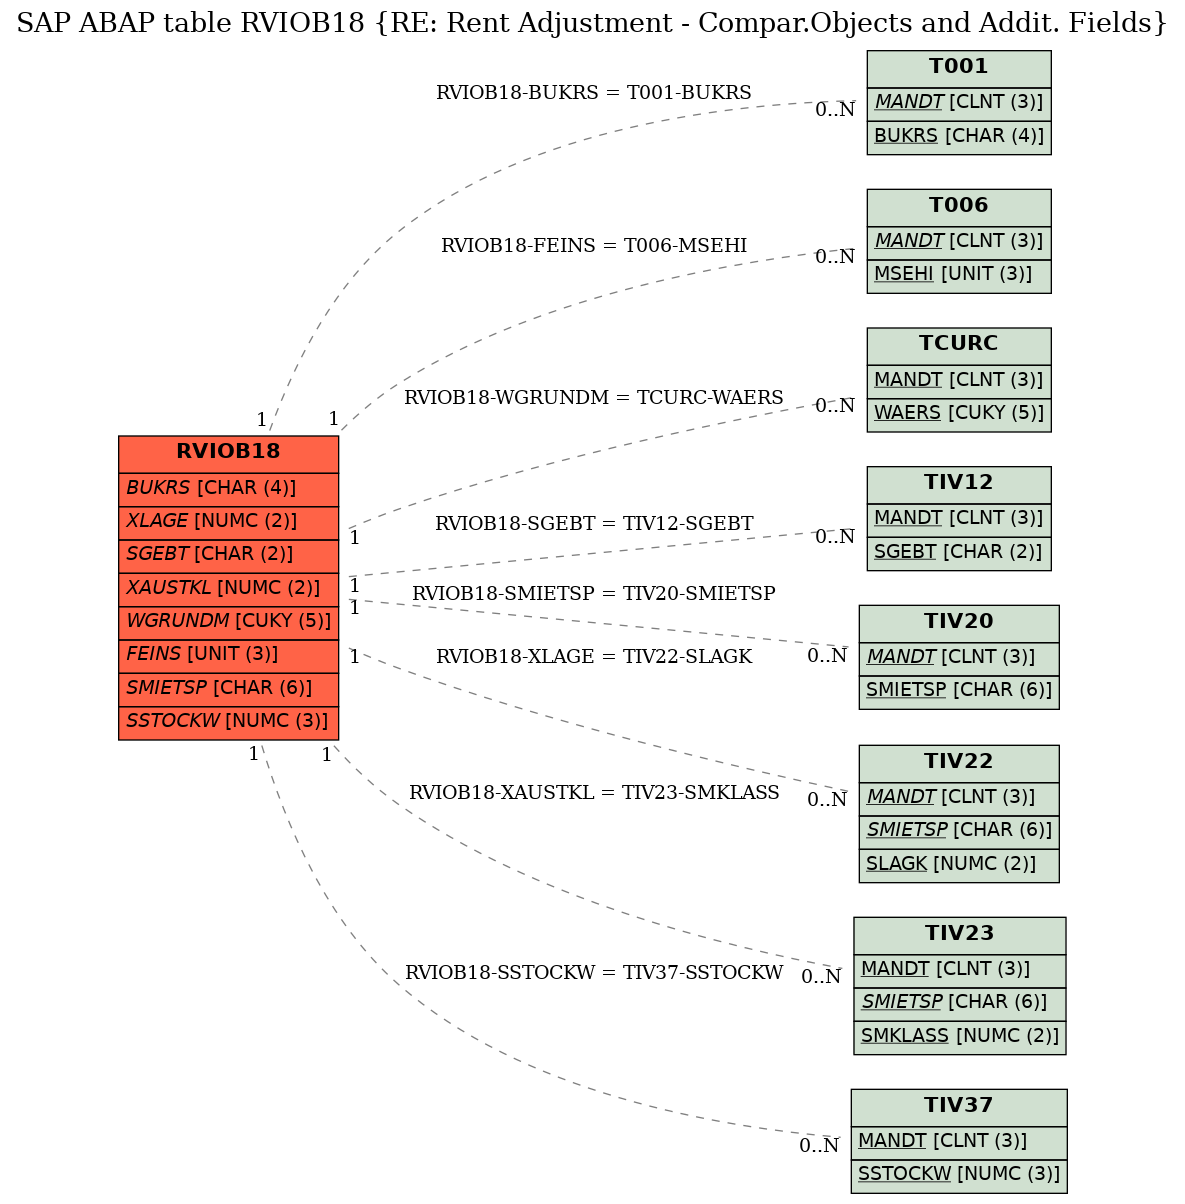 E-R Diagram for table RVIOB18 (RE: Rent Adjustment - Compar.Objects and Addit. Fields)